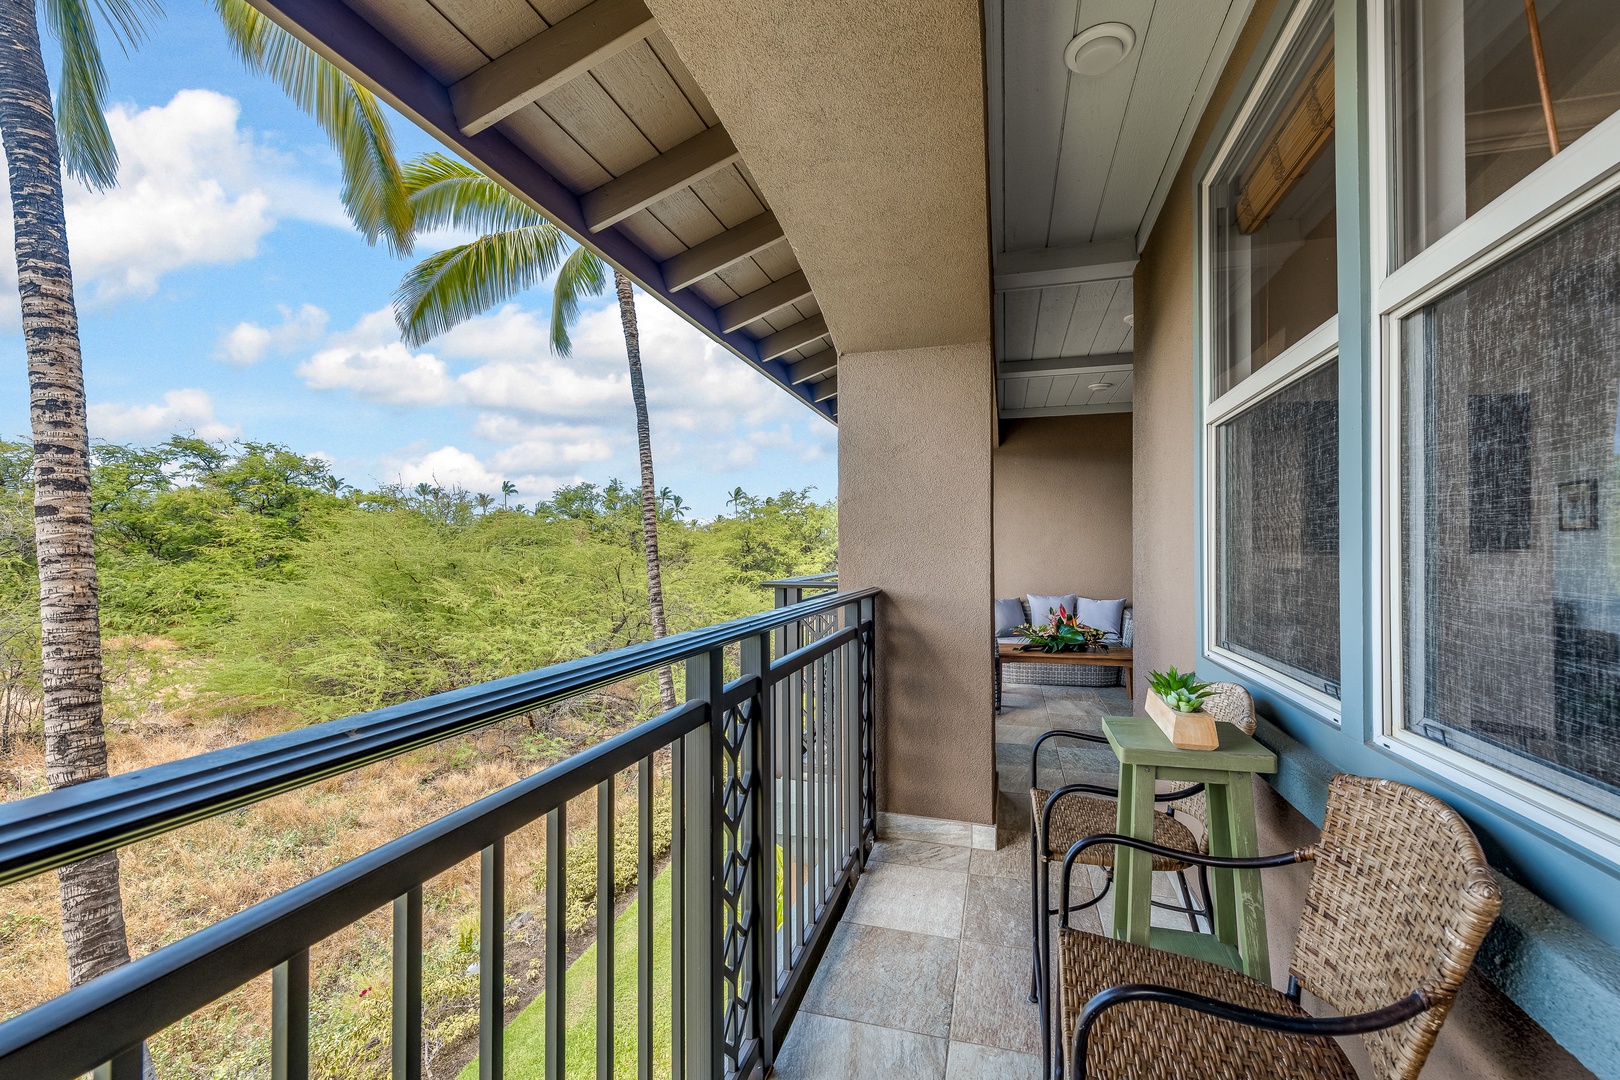 Kamuela Vacation Rentals, Mauna Lani Fairways #603 - Primary suite balcony extends along the entire unit